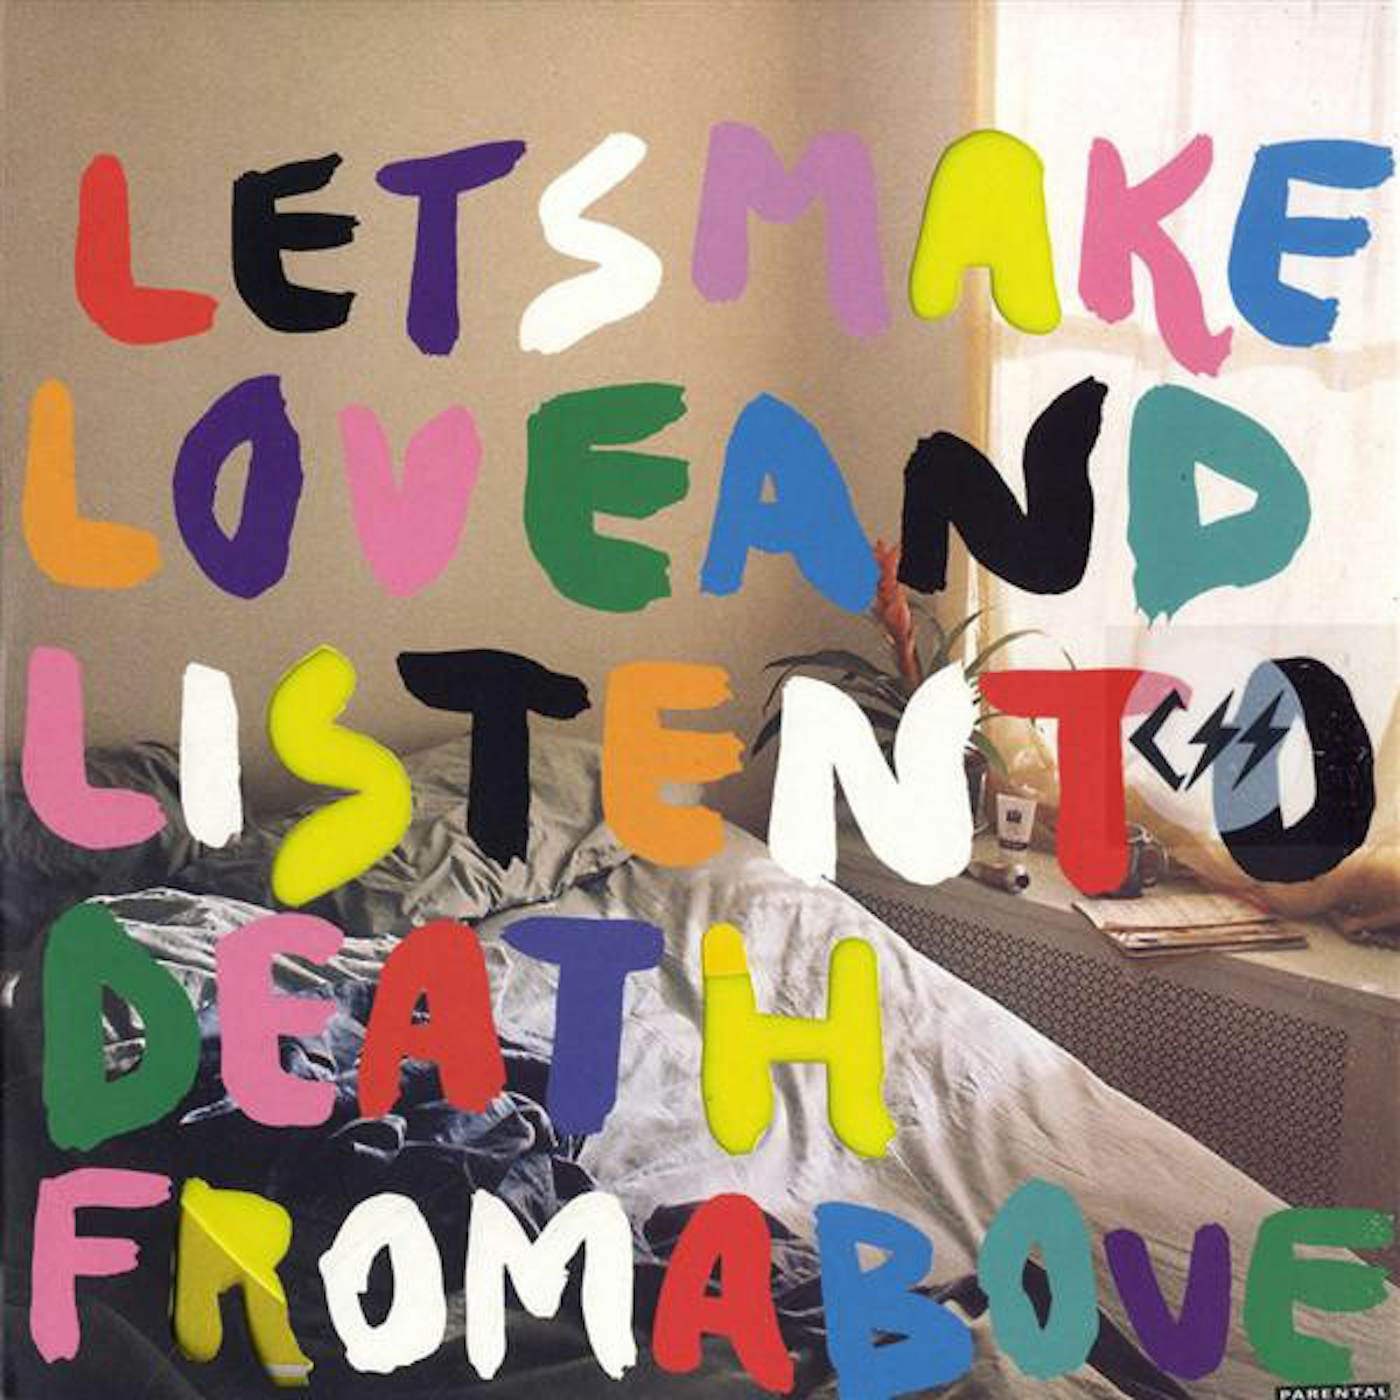 CSS LET'S MAKE LOVE & LISTEN TO DEATH FROM ABOVE Vinyl Record - UK Release